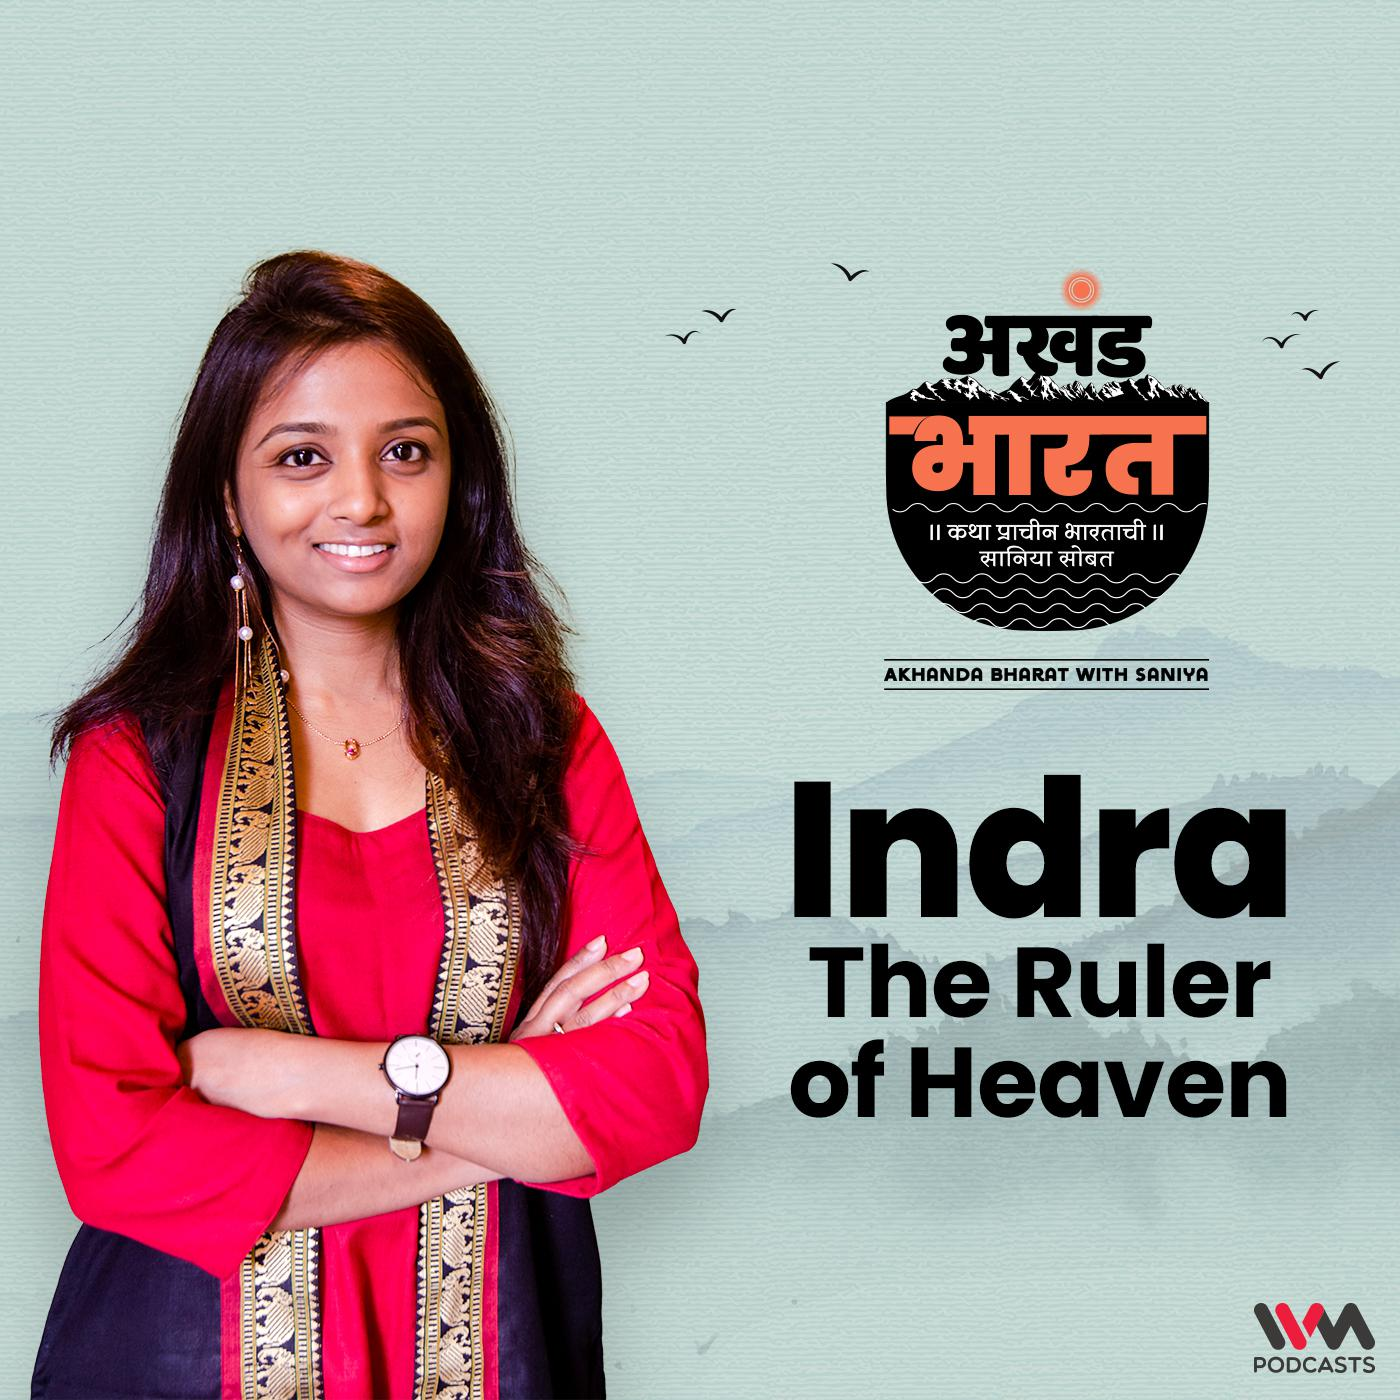 Indra - The Ruler of Heaven